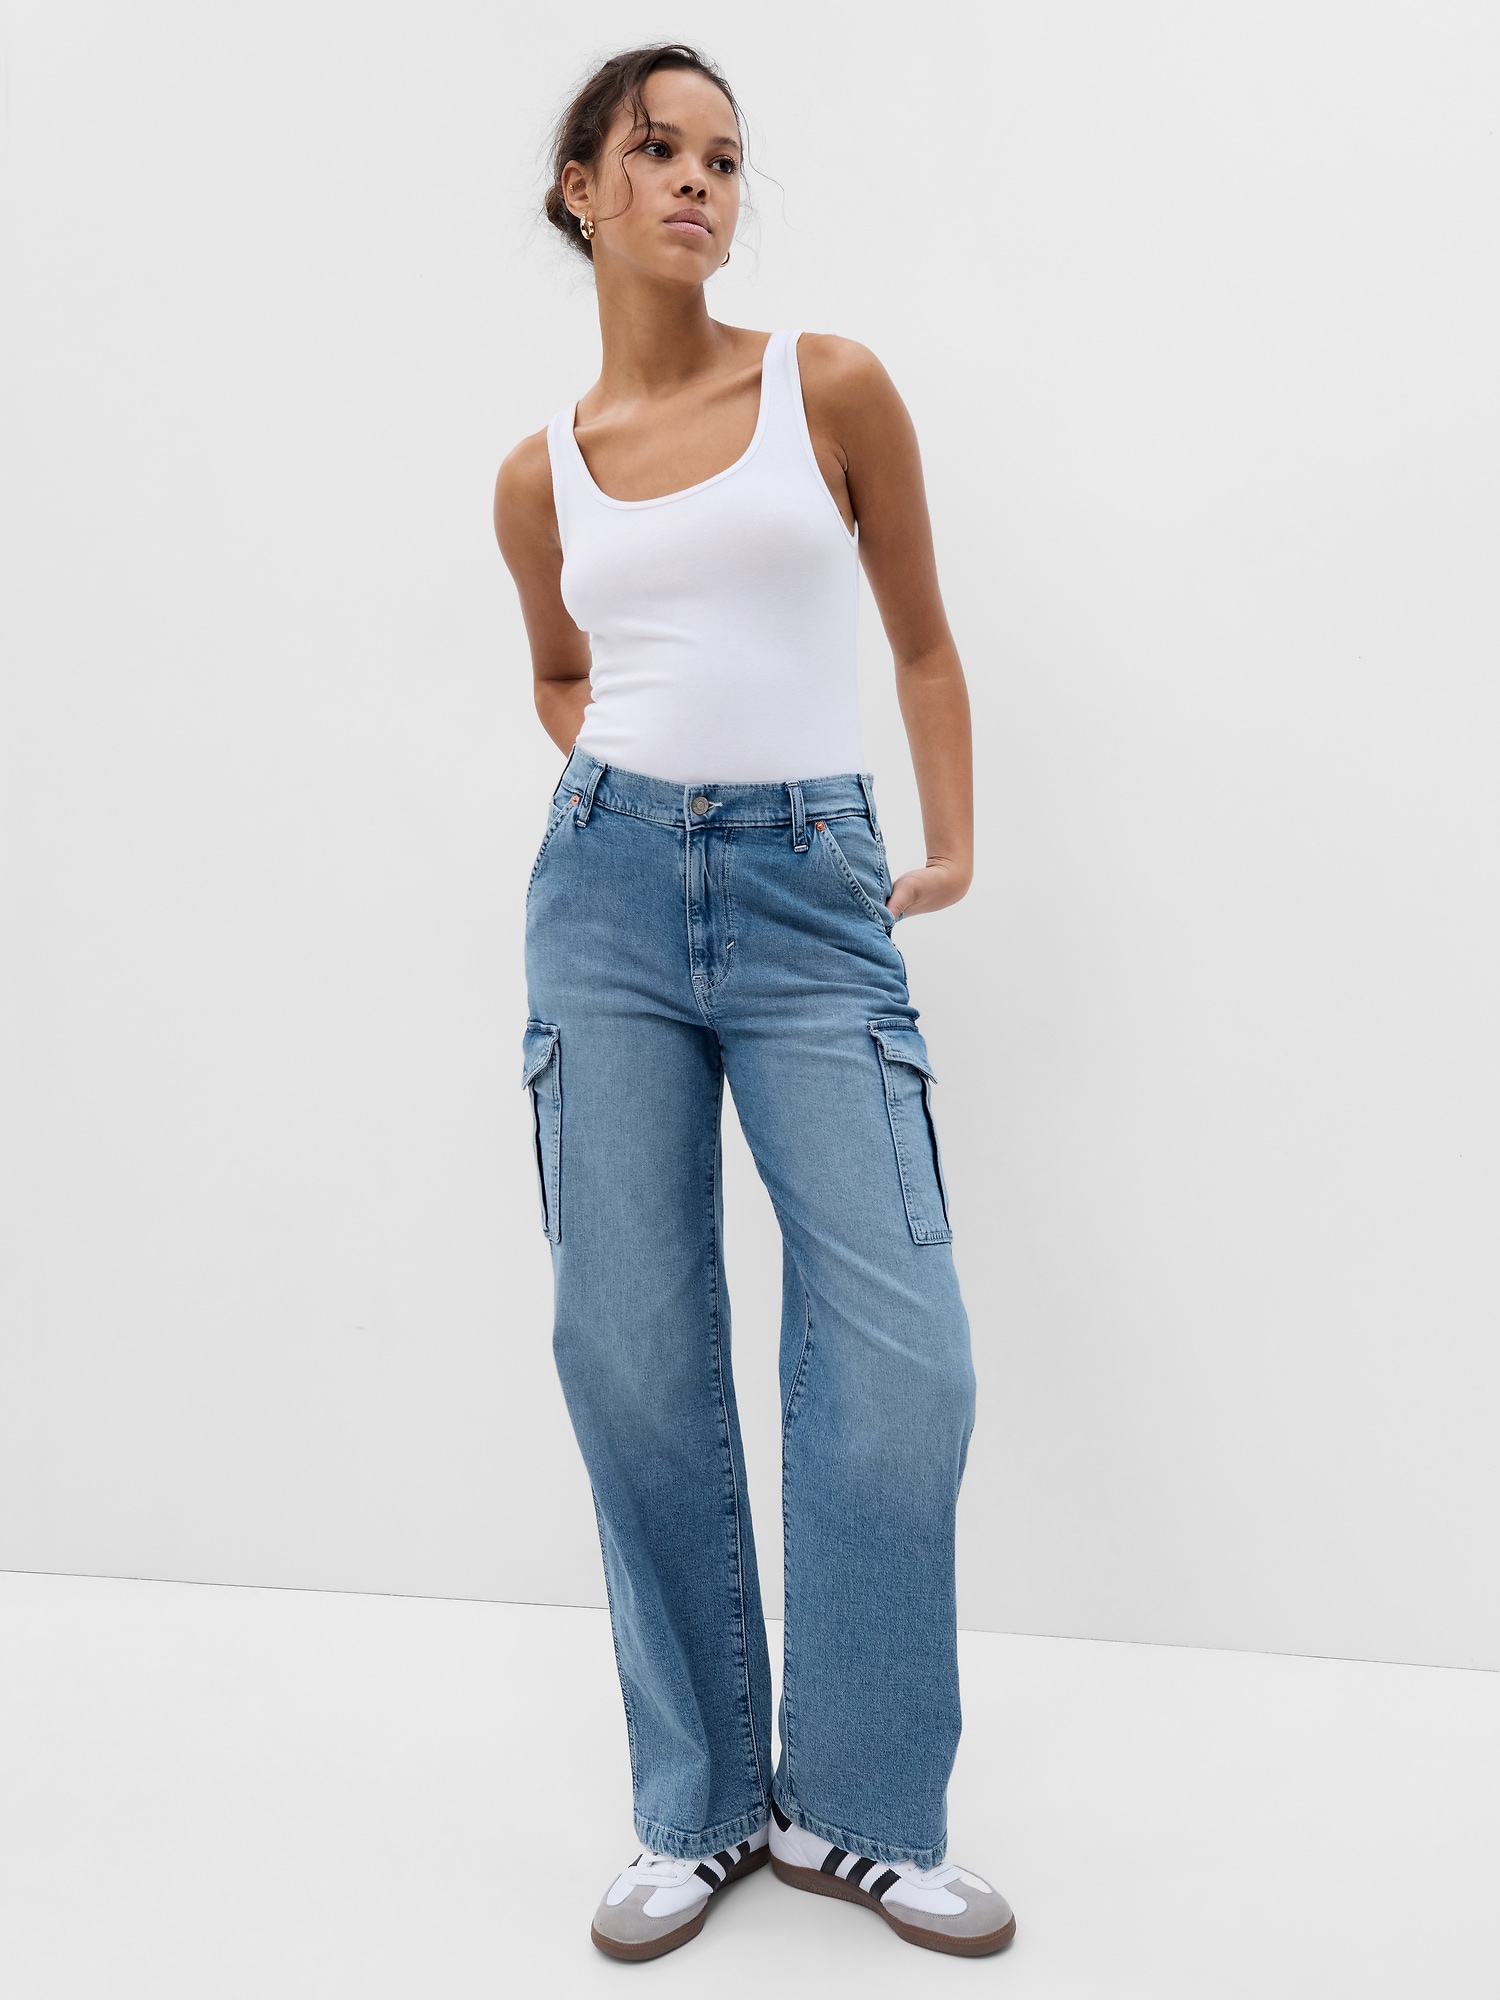 Gap Organic Cotton 90s Loose Cargo Jeans with Washwell